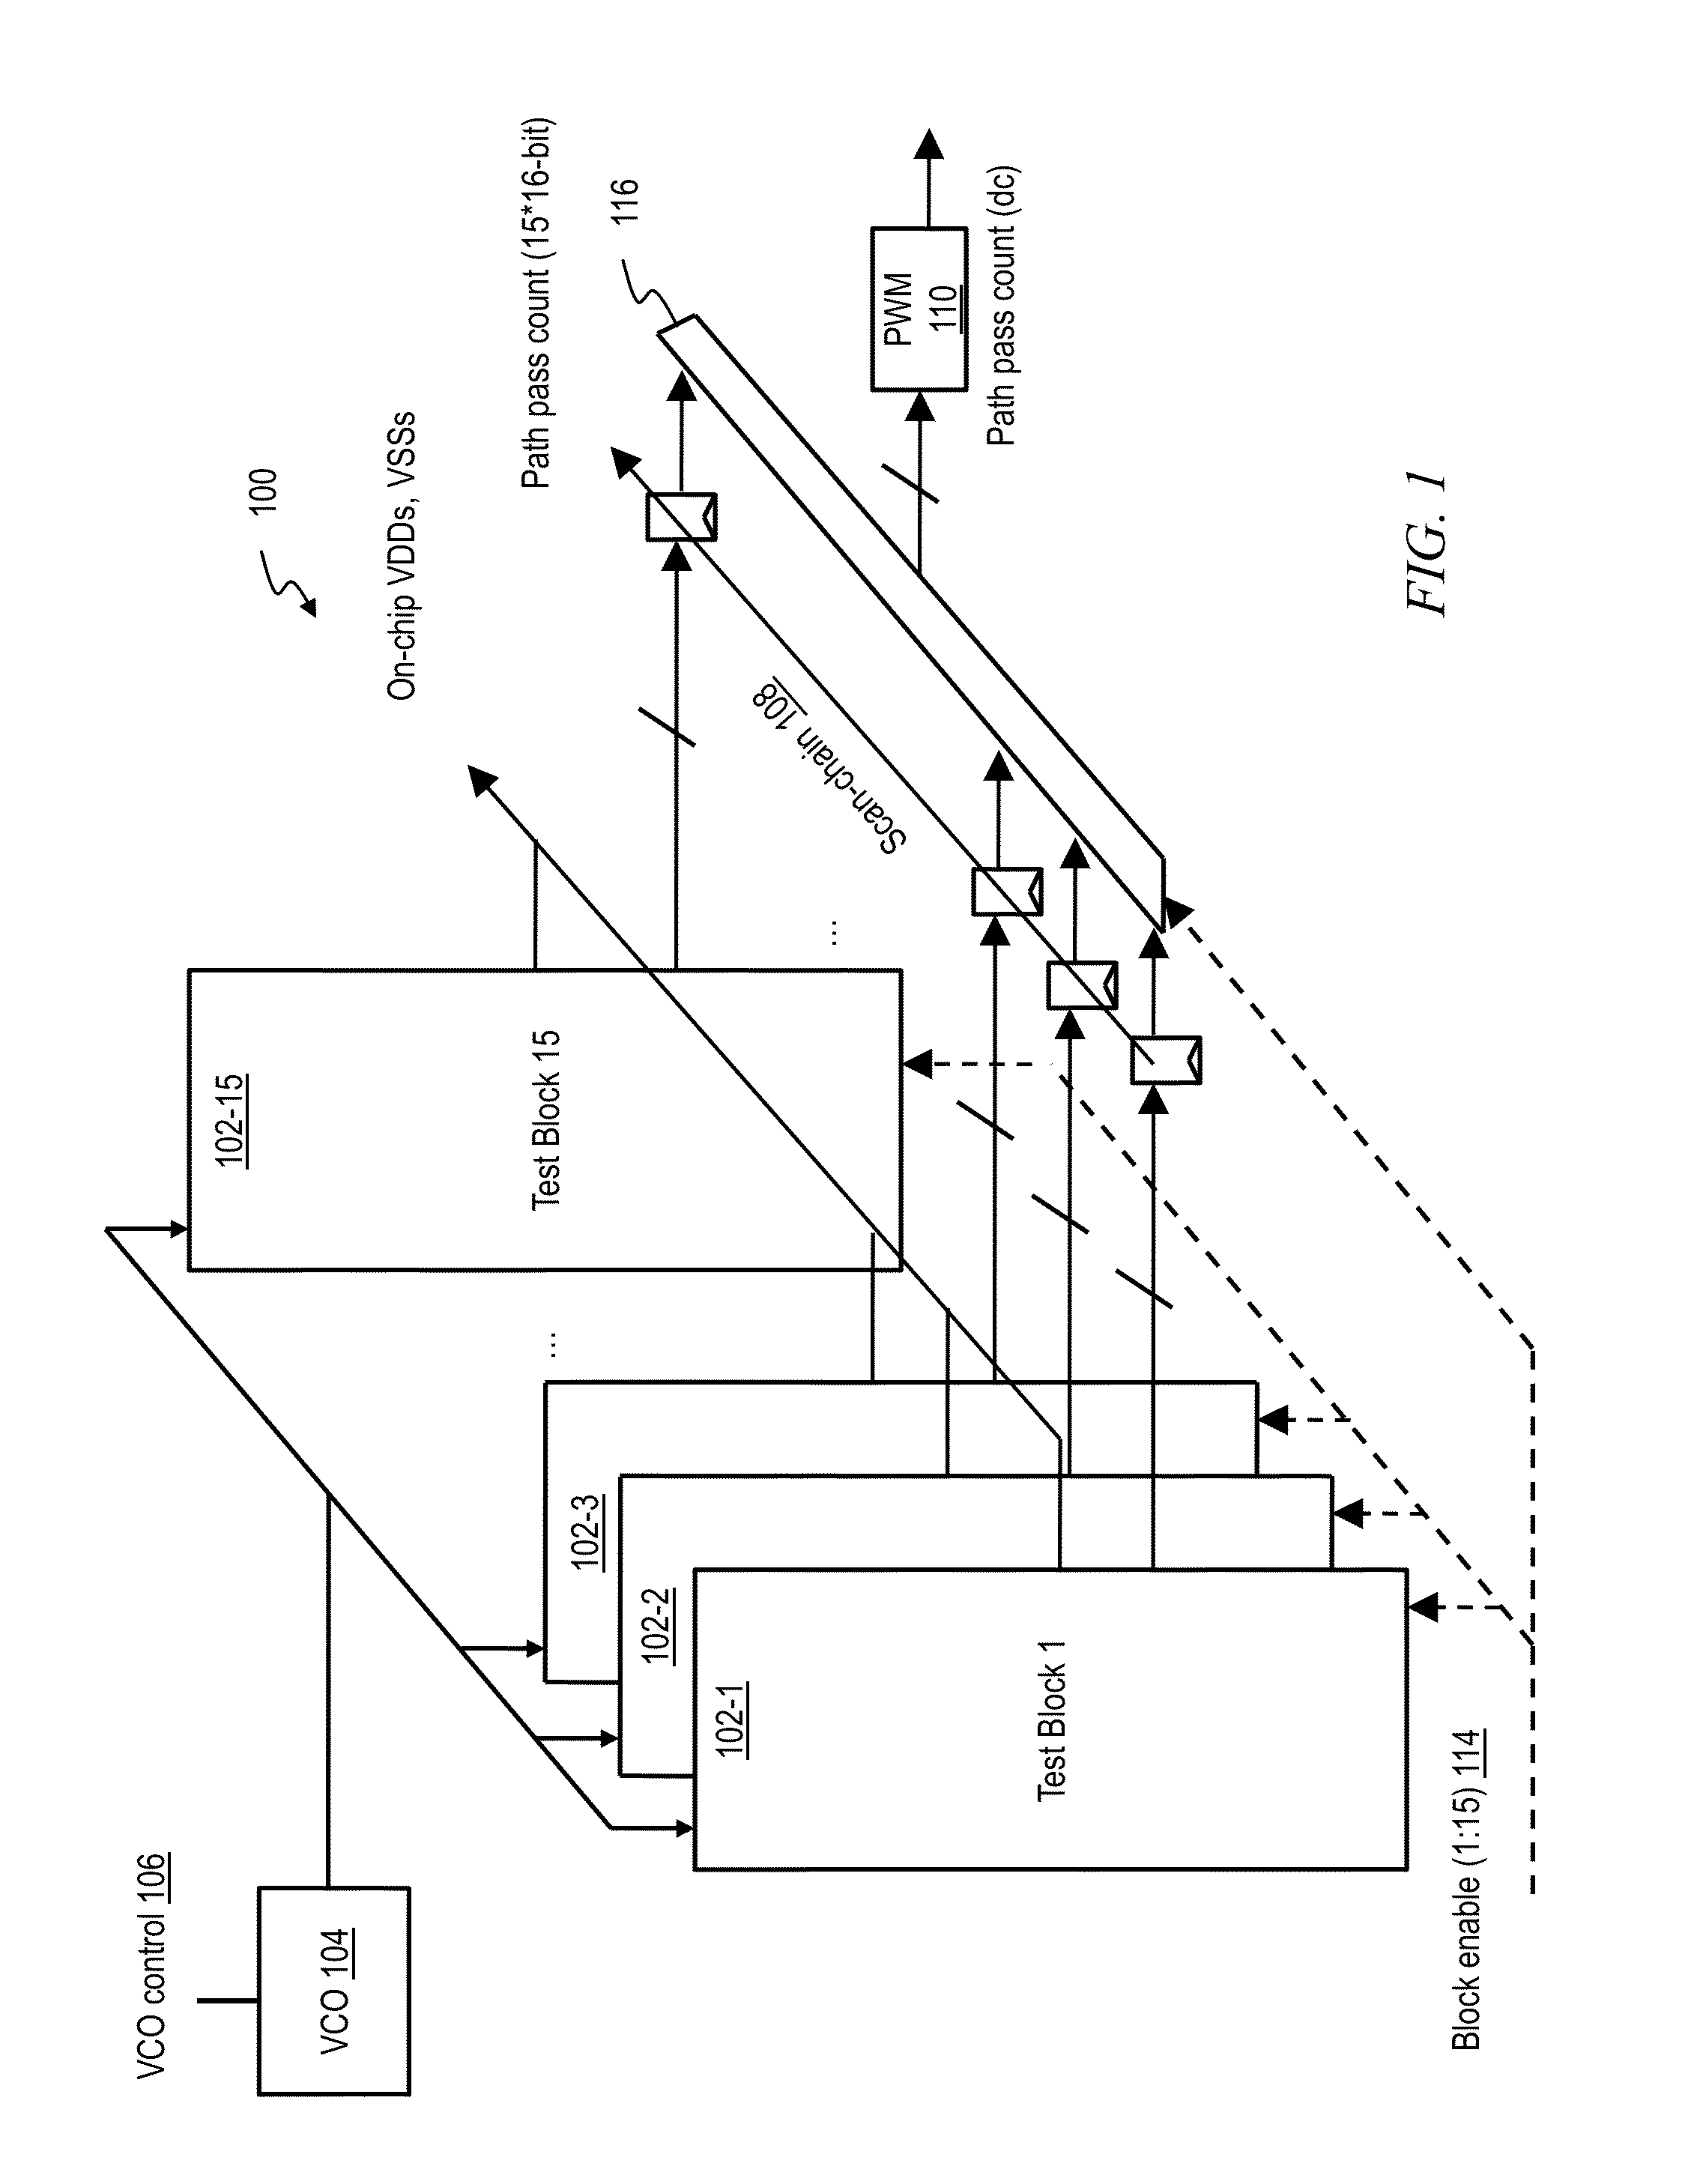 Test structure to measure delay variability mismatch of digital logic paths